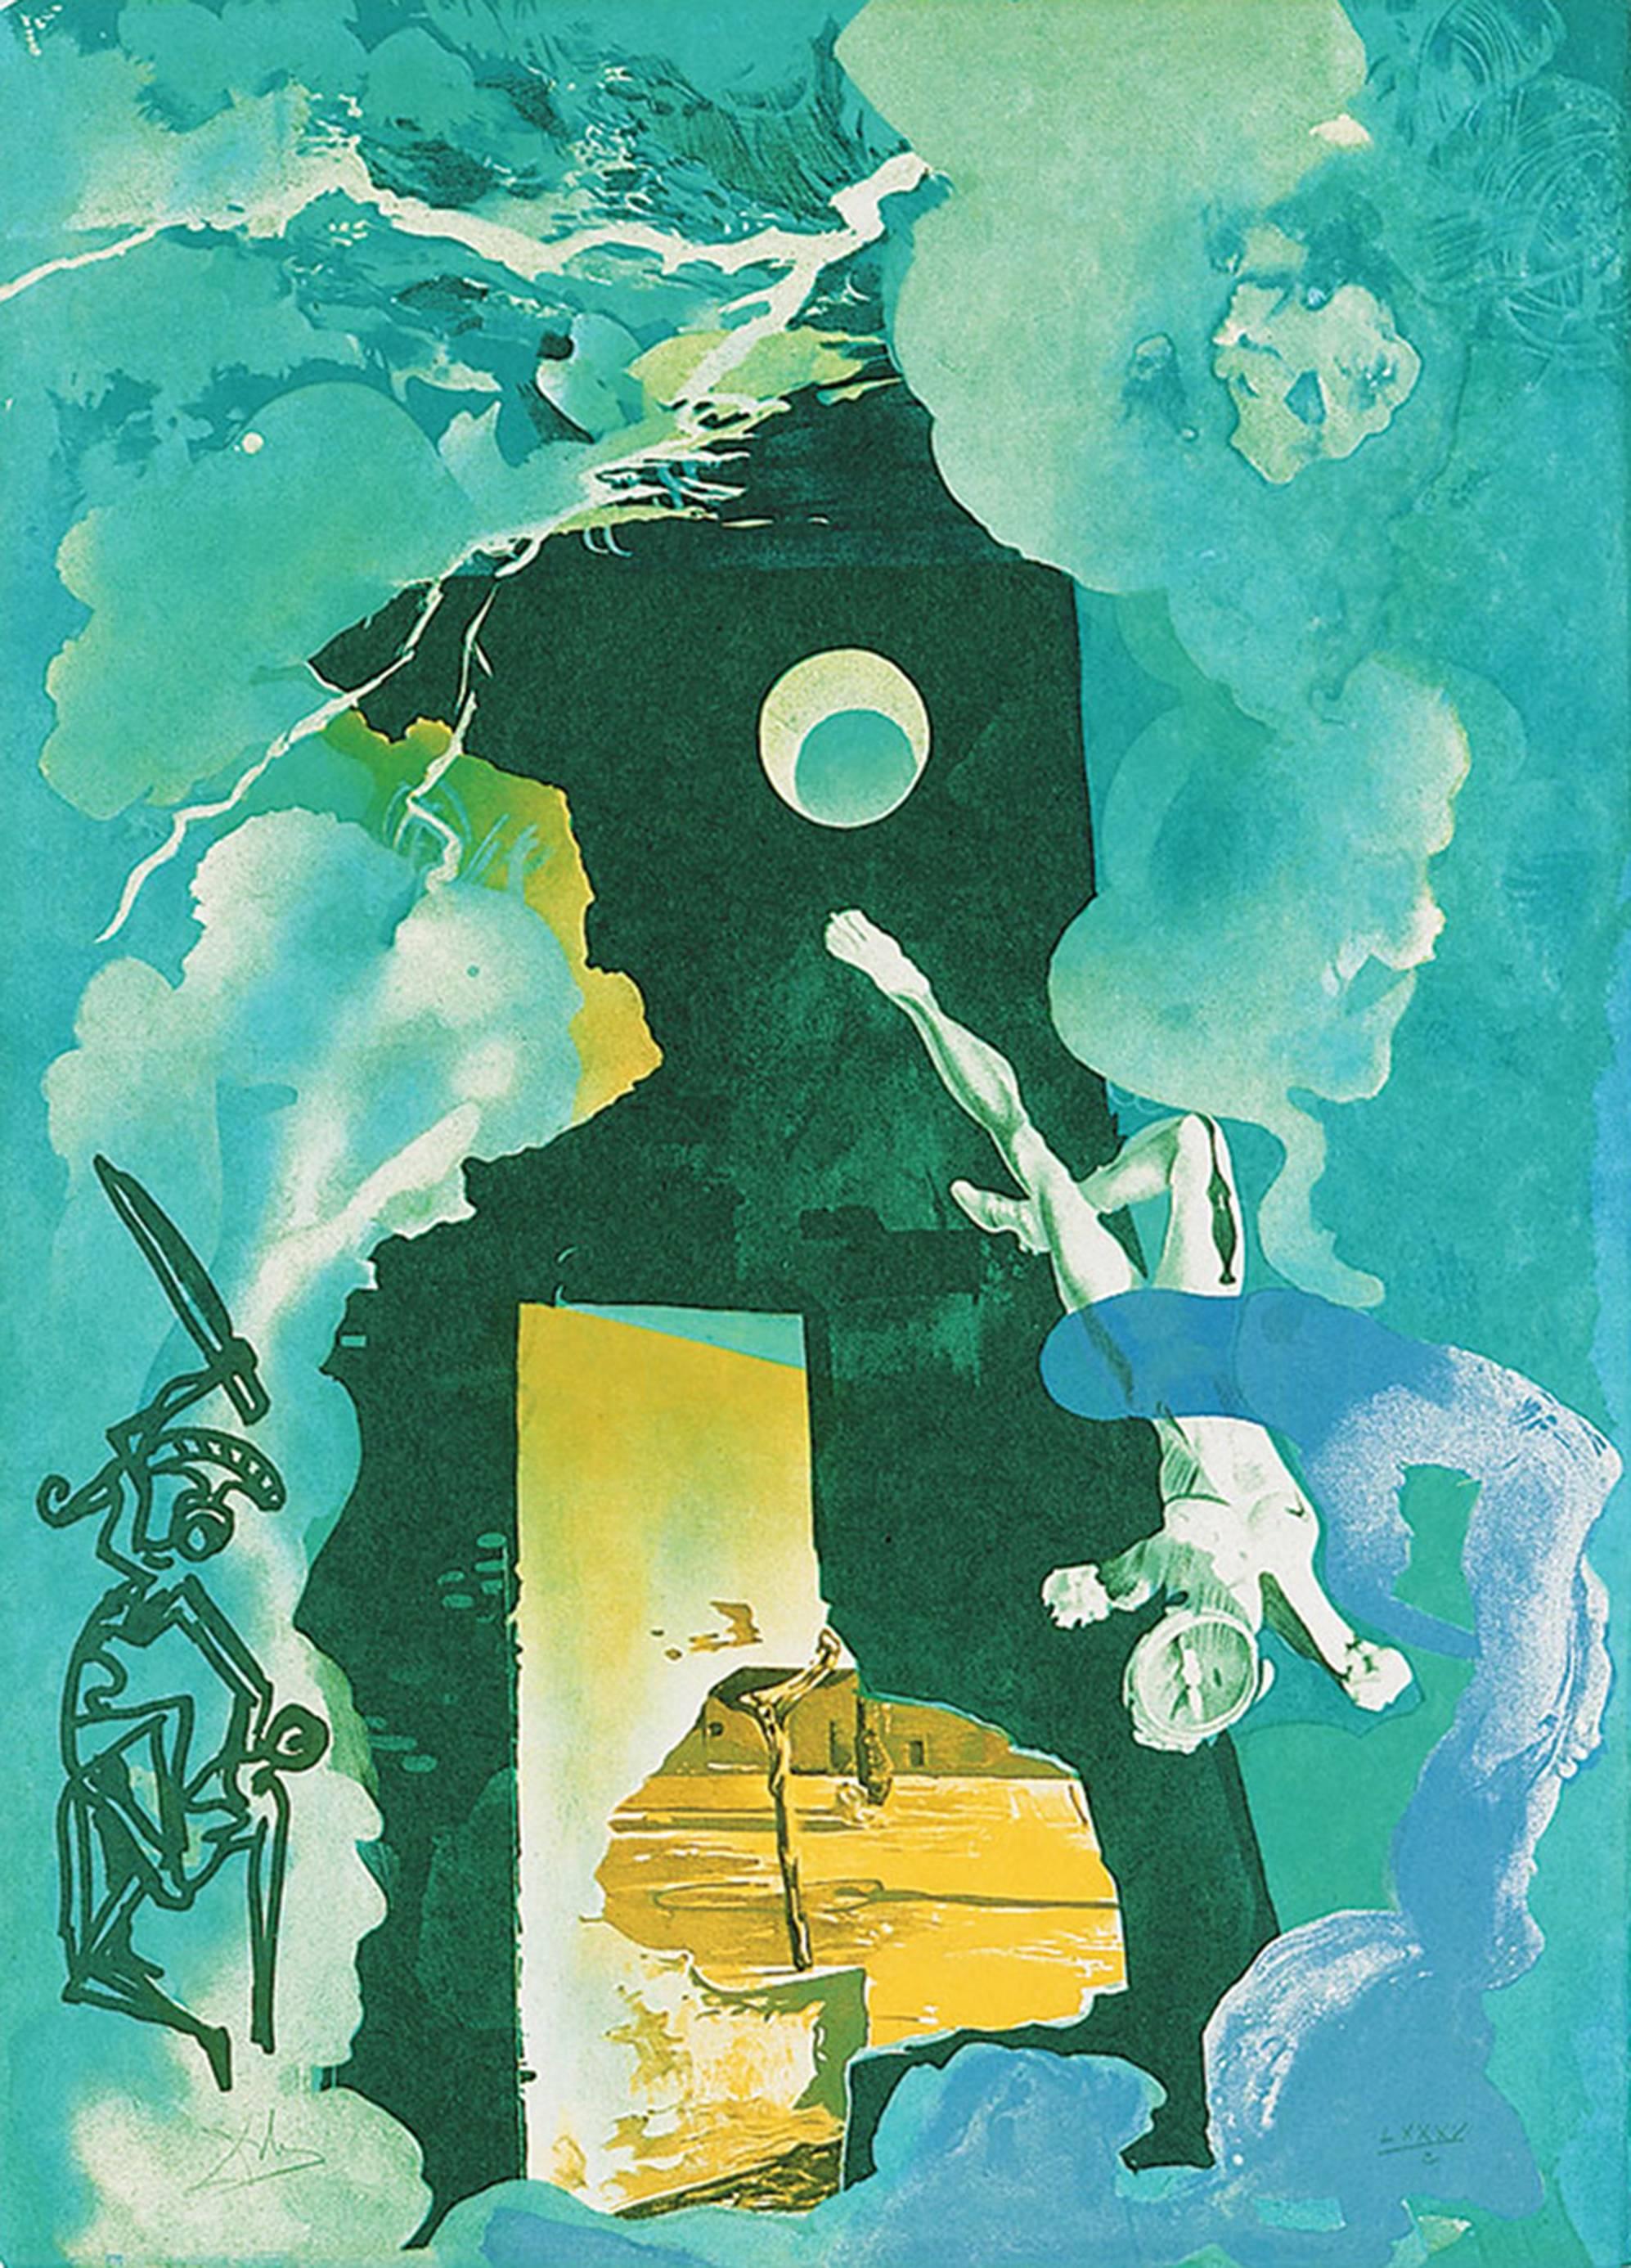 Salvador Dalí Print – The Eternity of Love from the Trilogy of Love Portfolio